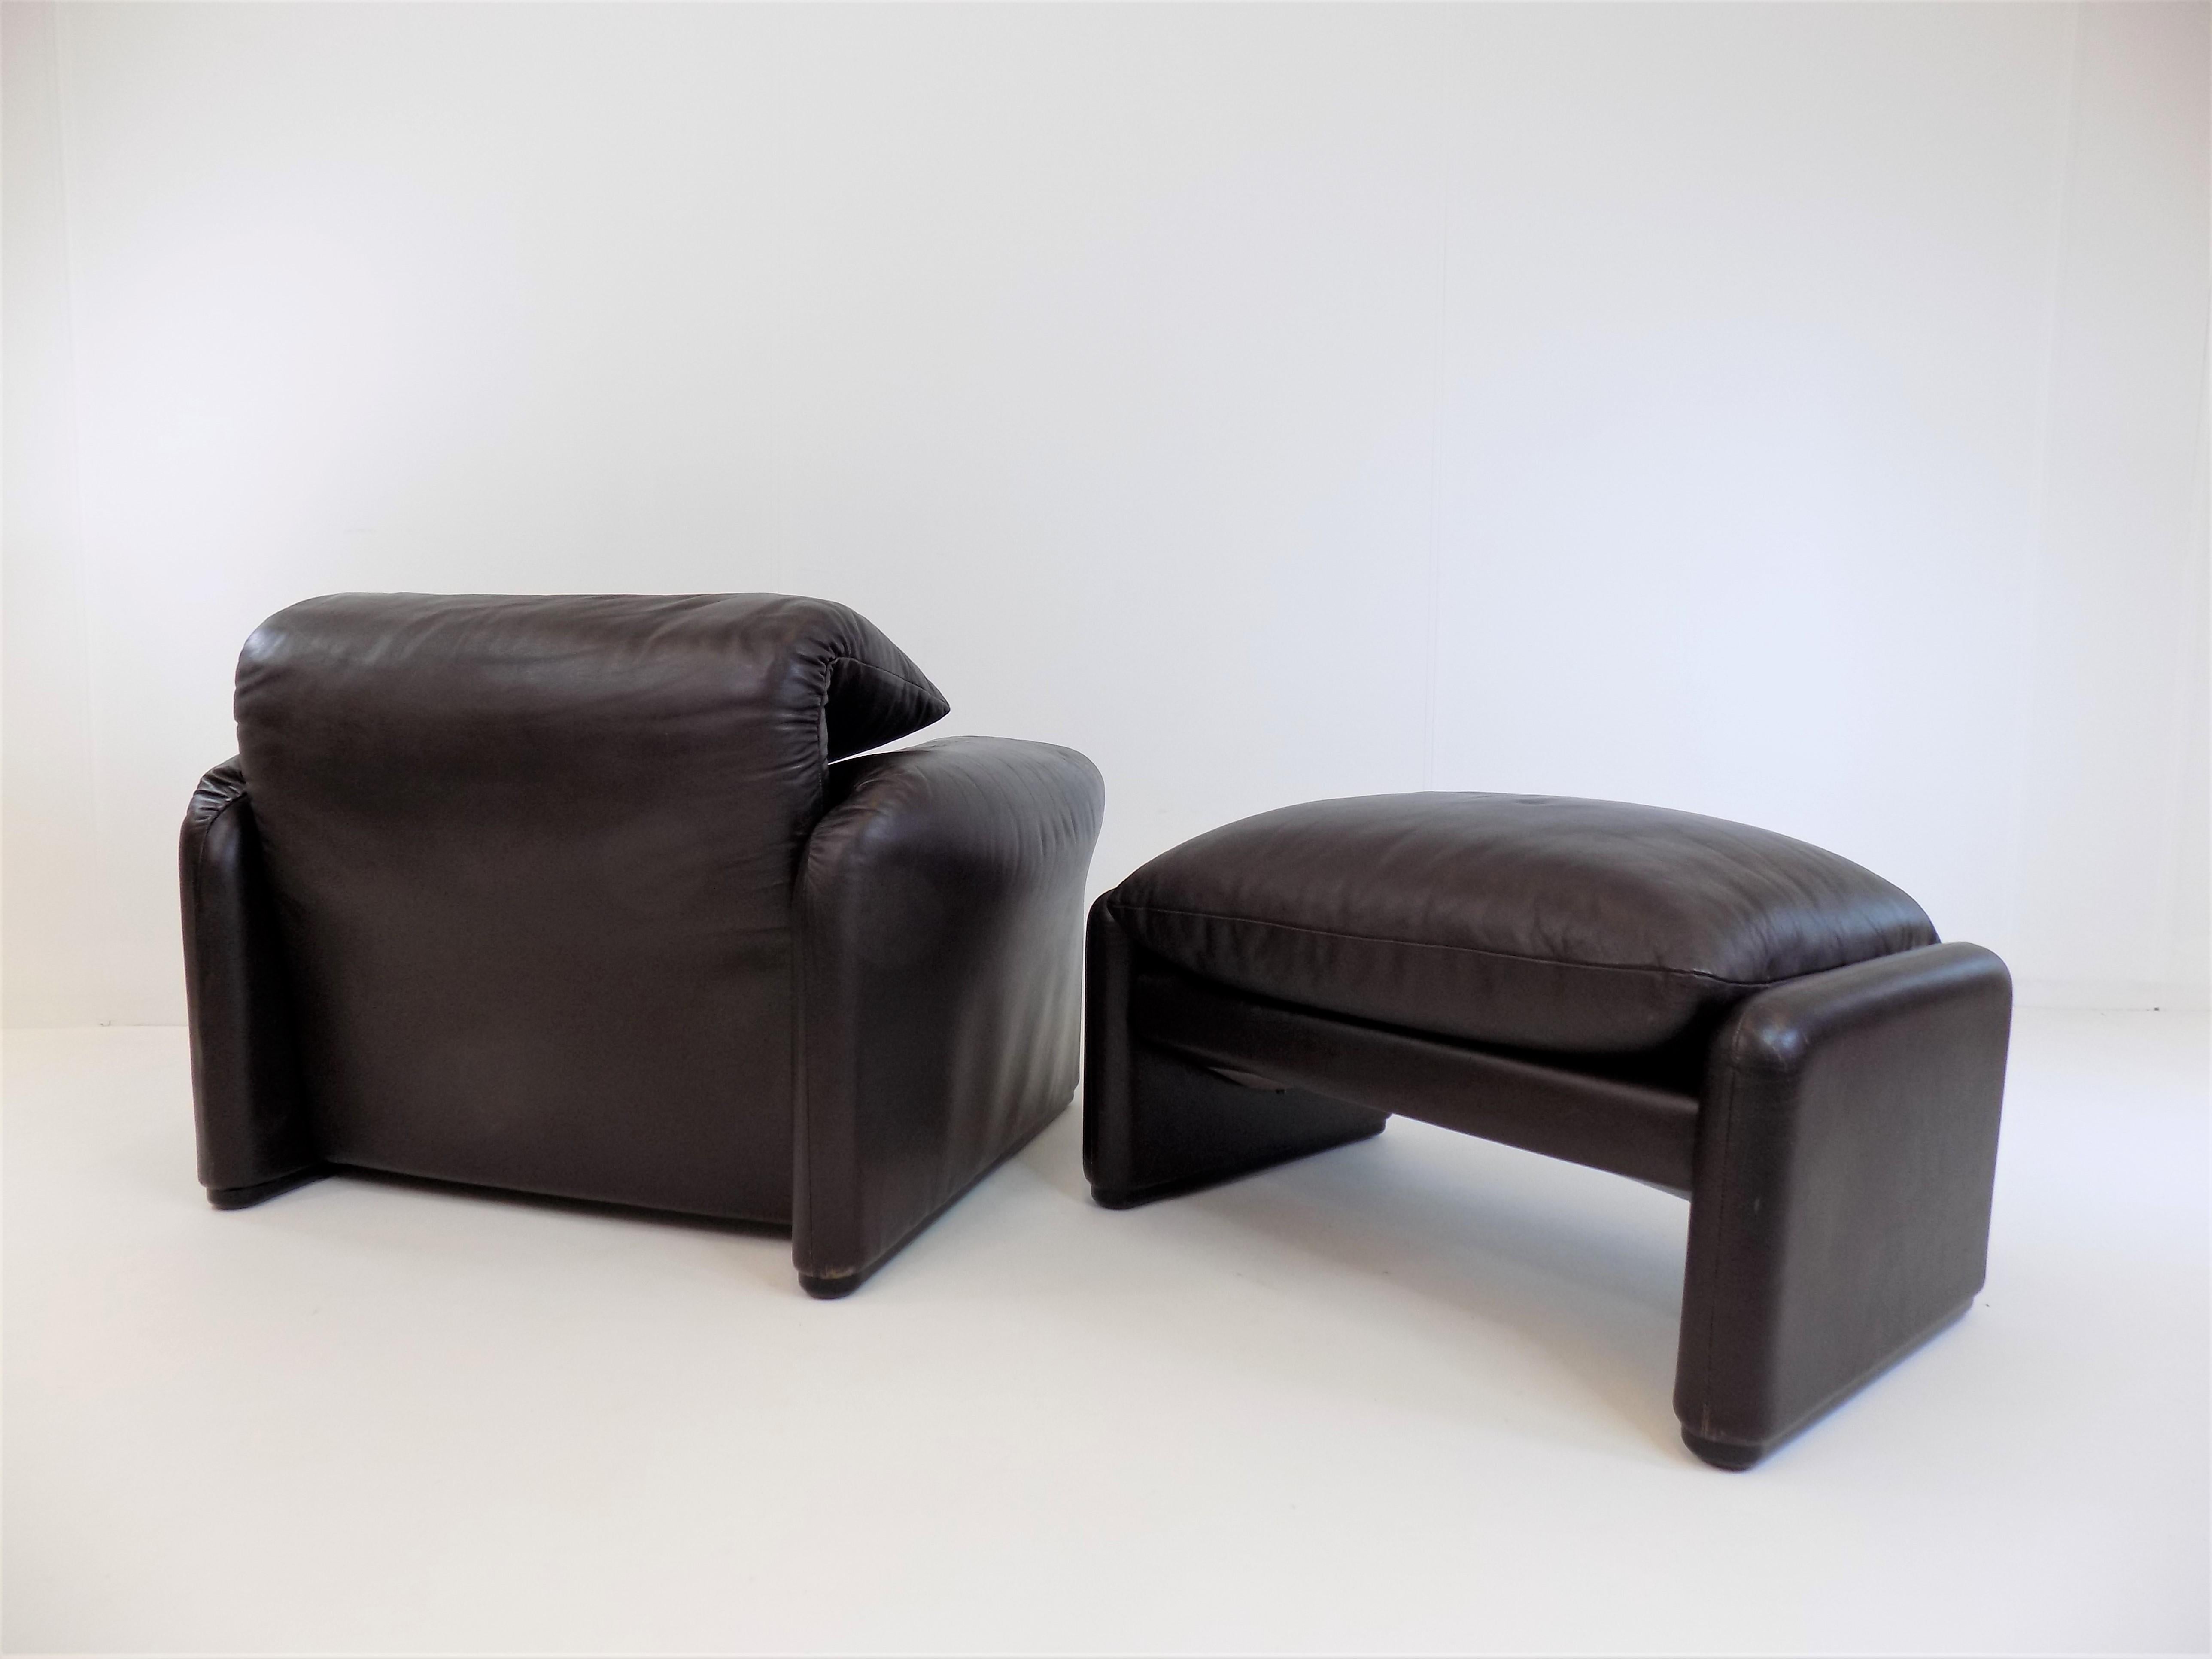 Late 20th Century Cassina Maralunga Leather Armchair with Ottoman by Vico Magistretti